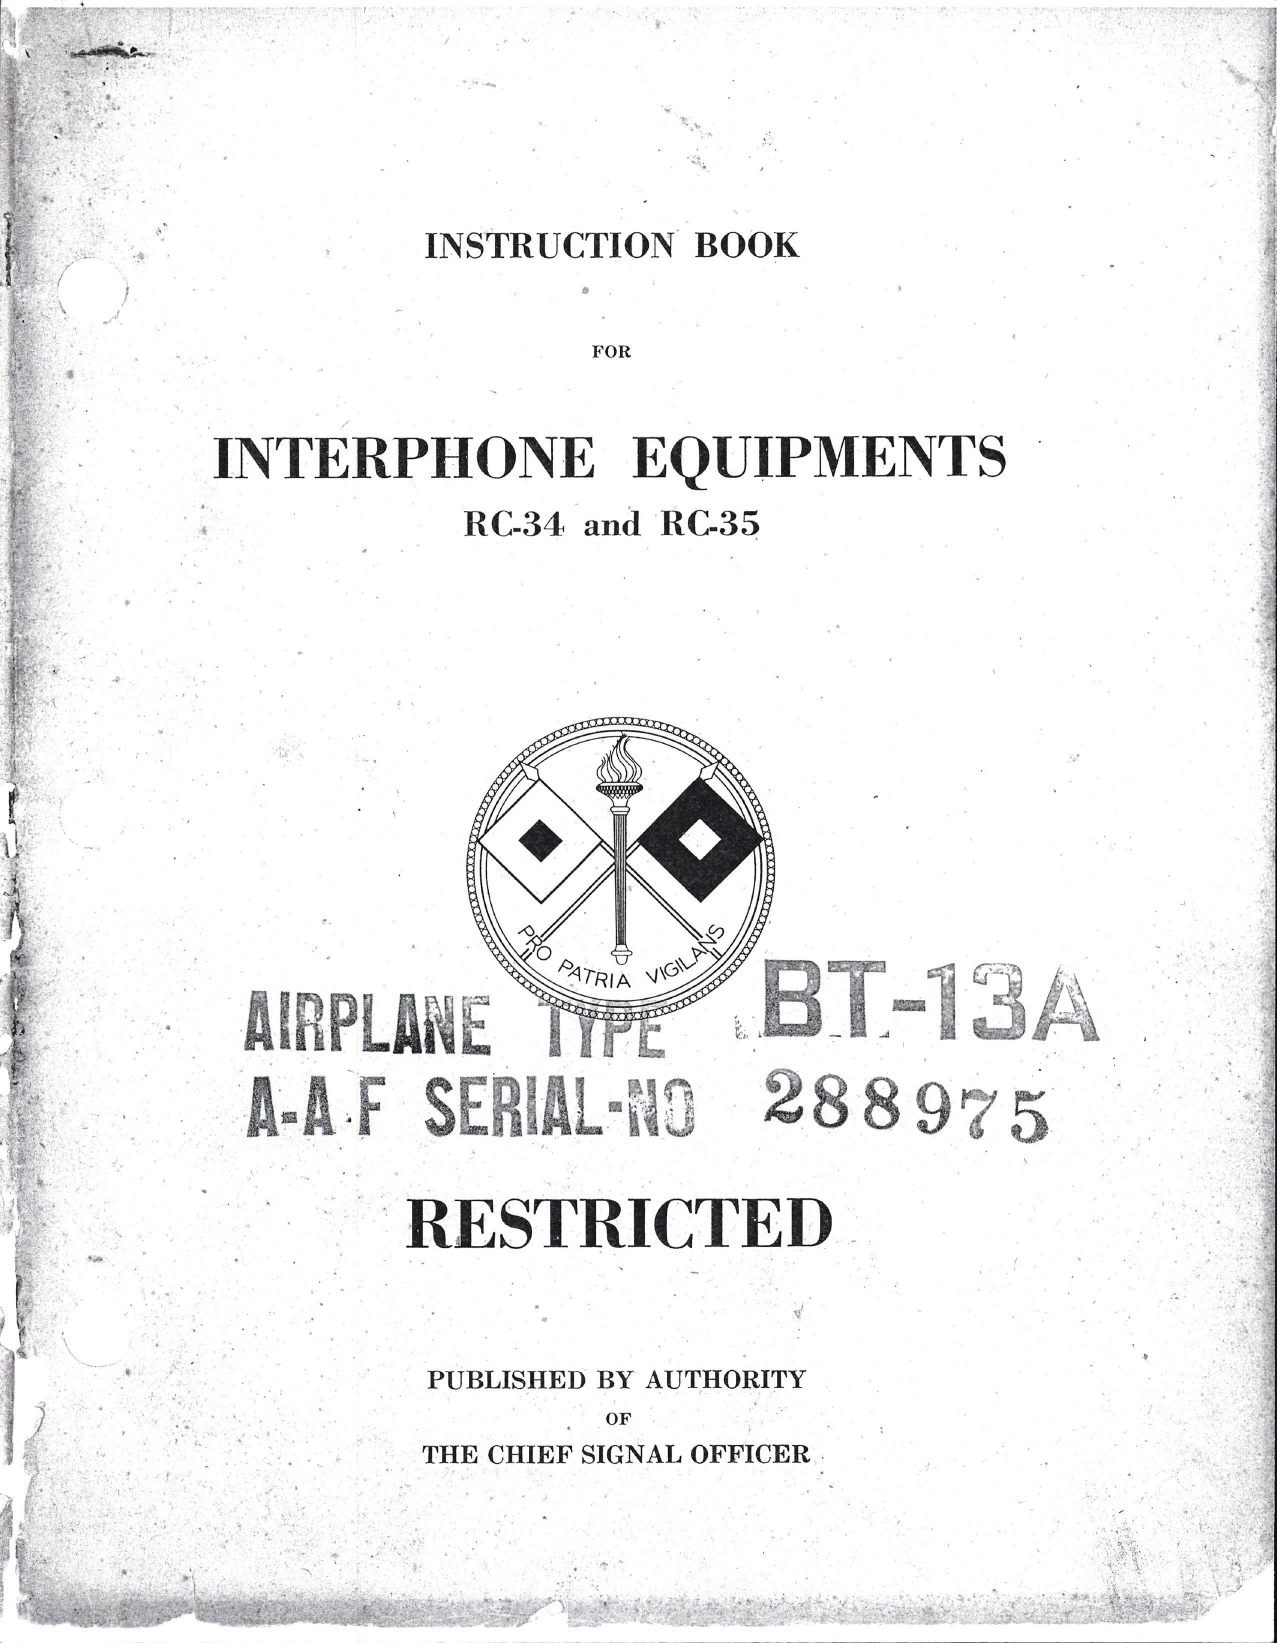 Sample page 1 from AirCorps Library document: Instruction Book for Interphone Equipment - Models RC-34 and RC-35